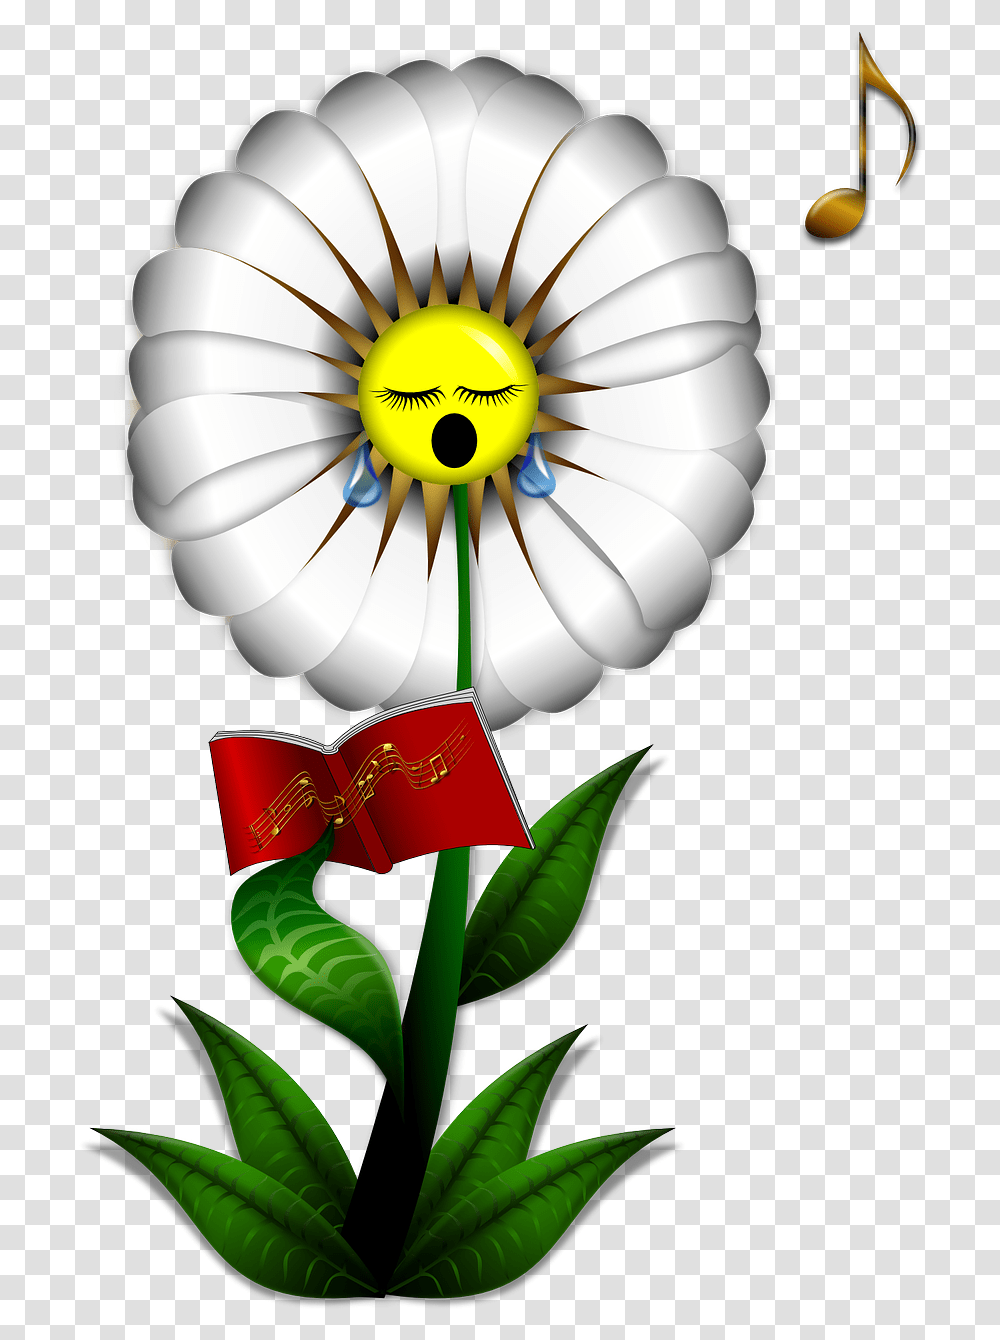 Music And Plant Growth Music Activities For Toddlers, Flower, Blossom, Daisy, Daisies Transparent Png